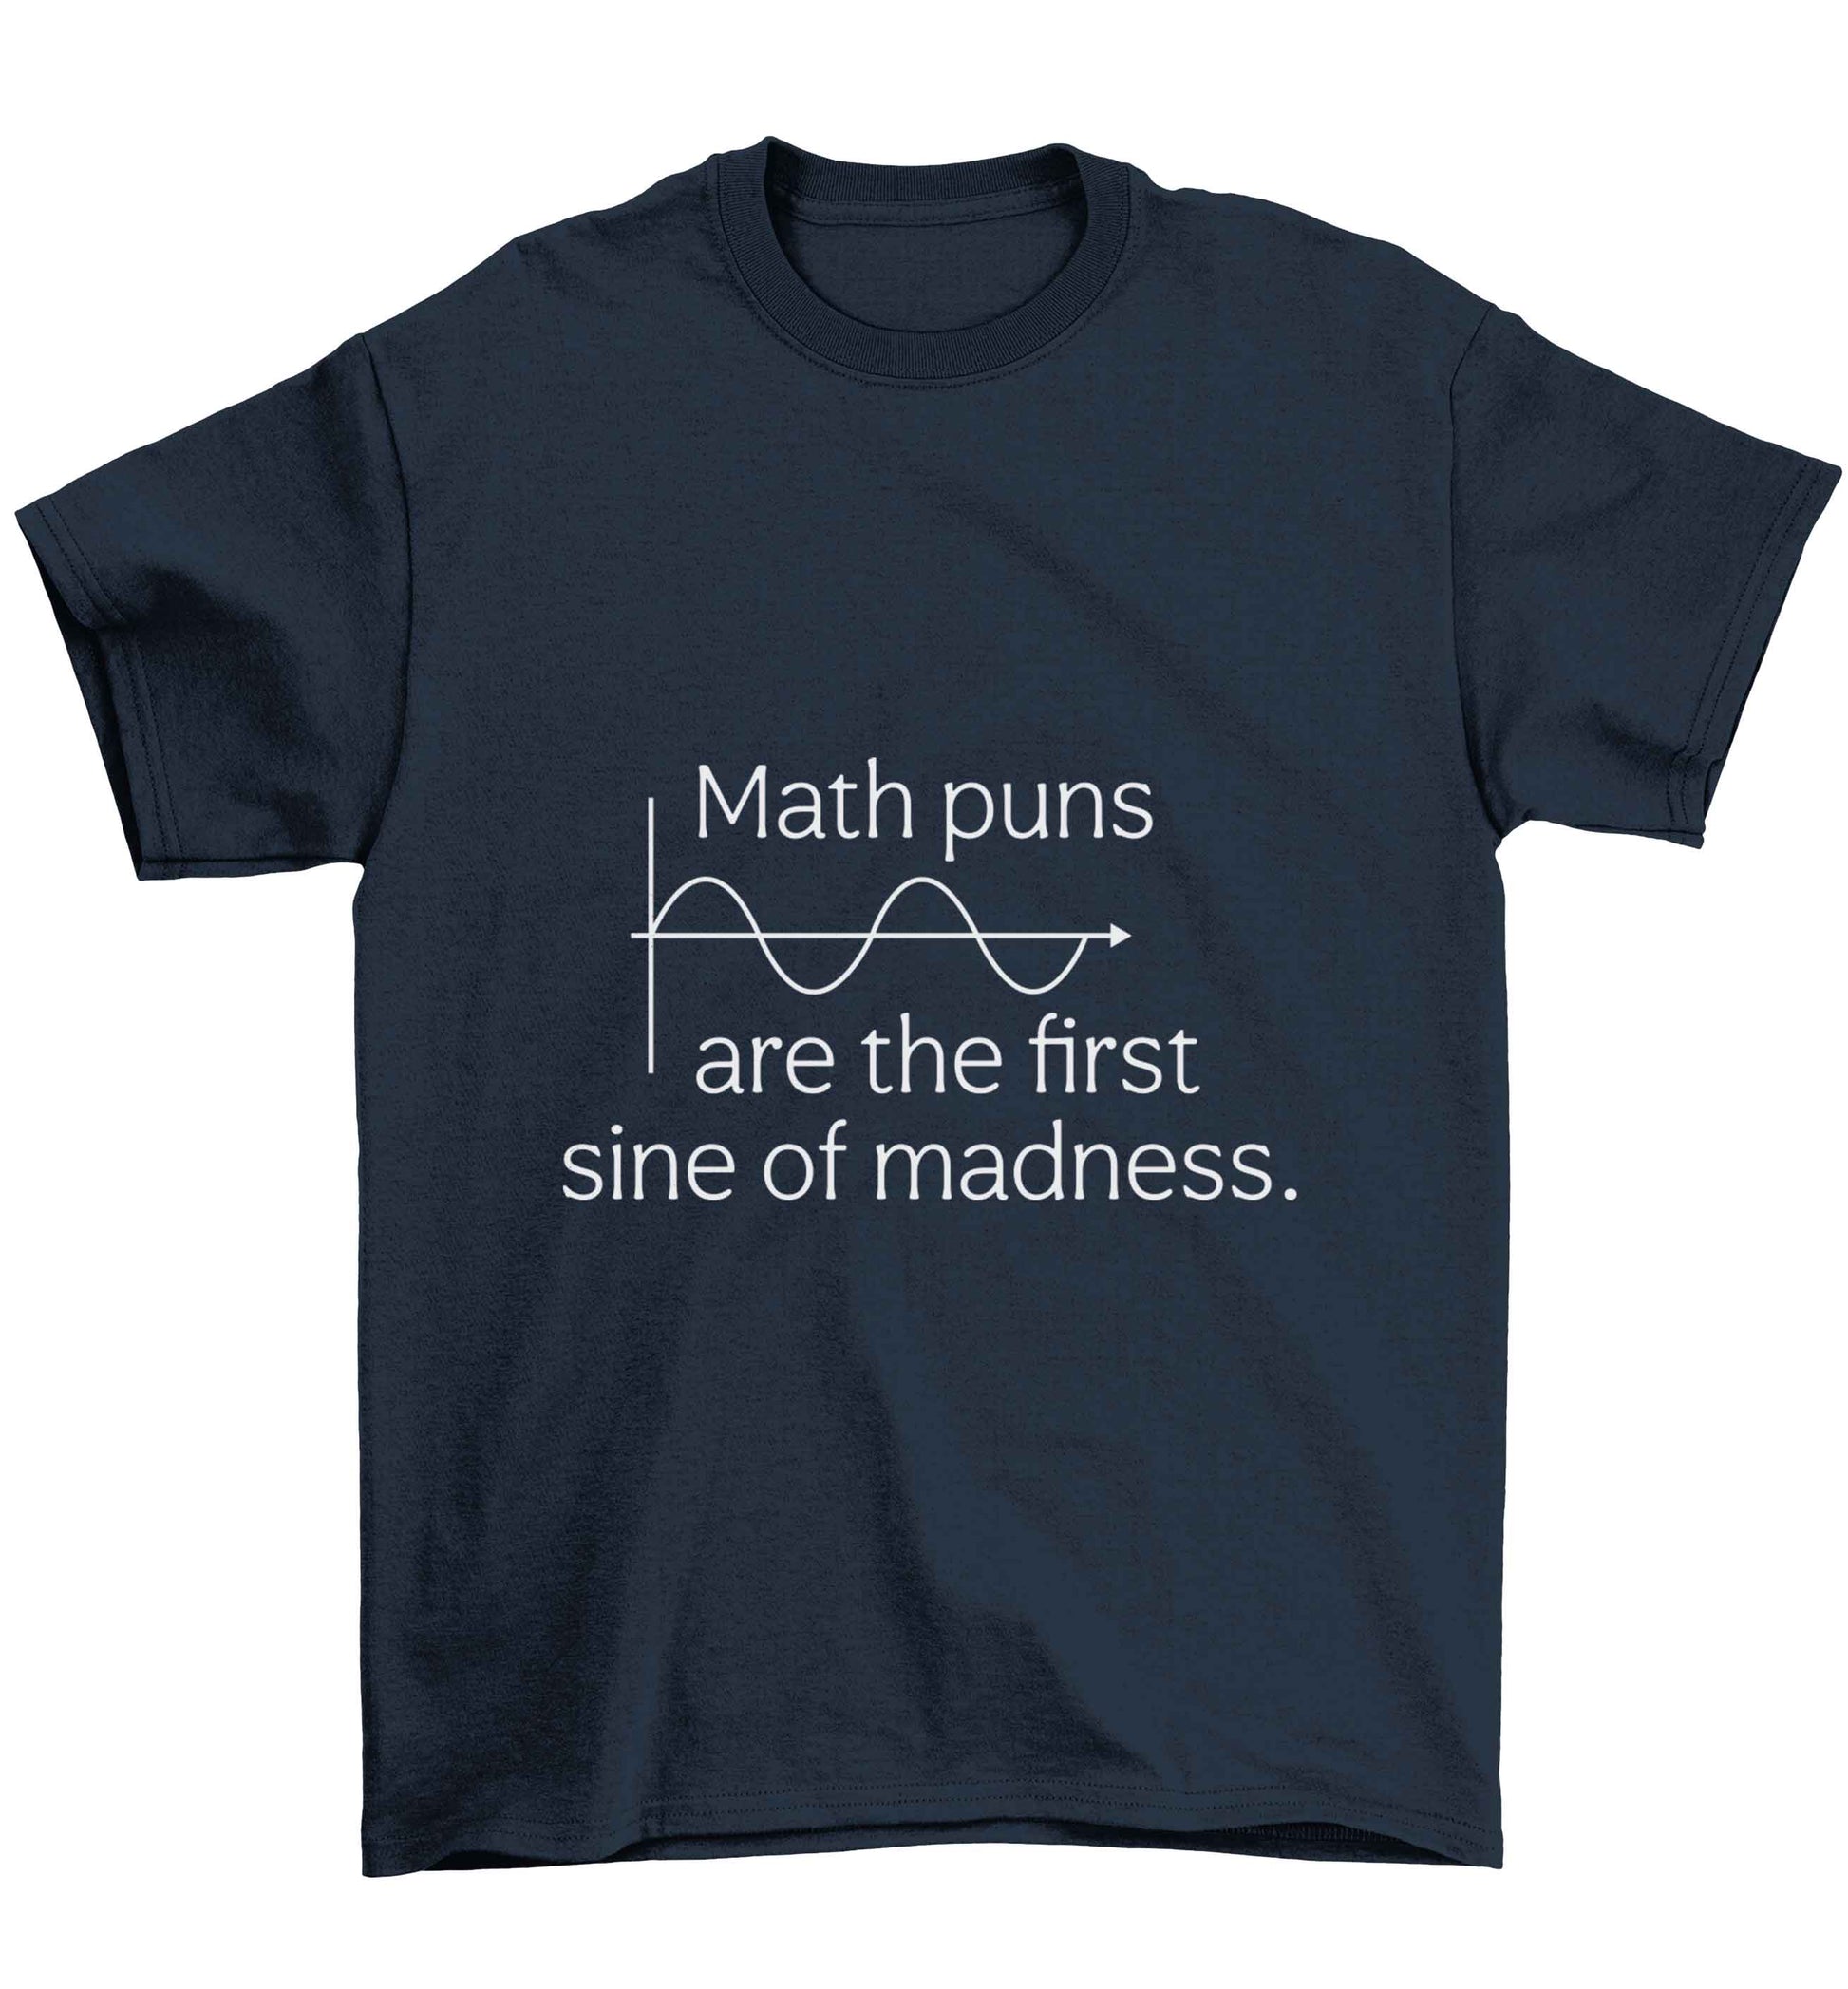 Math puns are the first sine of madness Children's navy Tshirt 12-13 Years